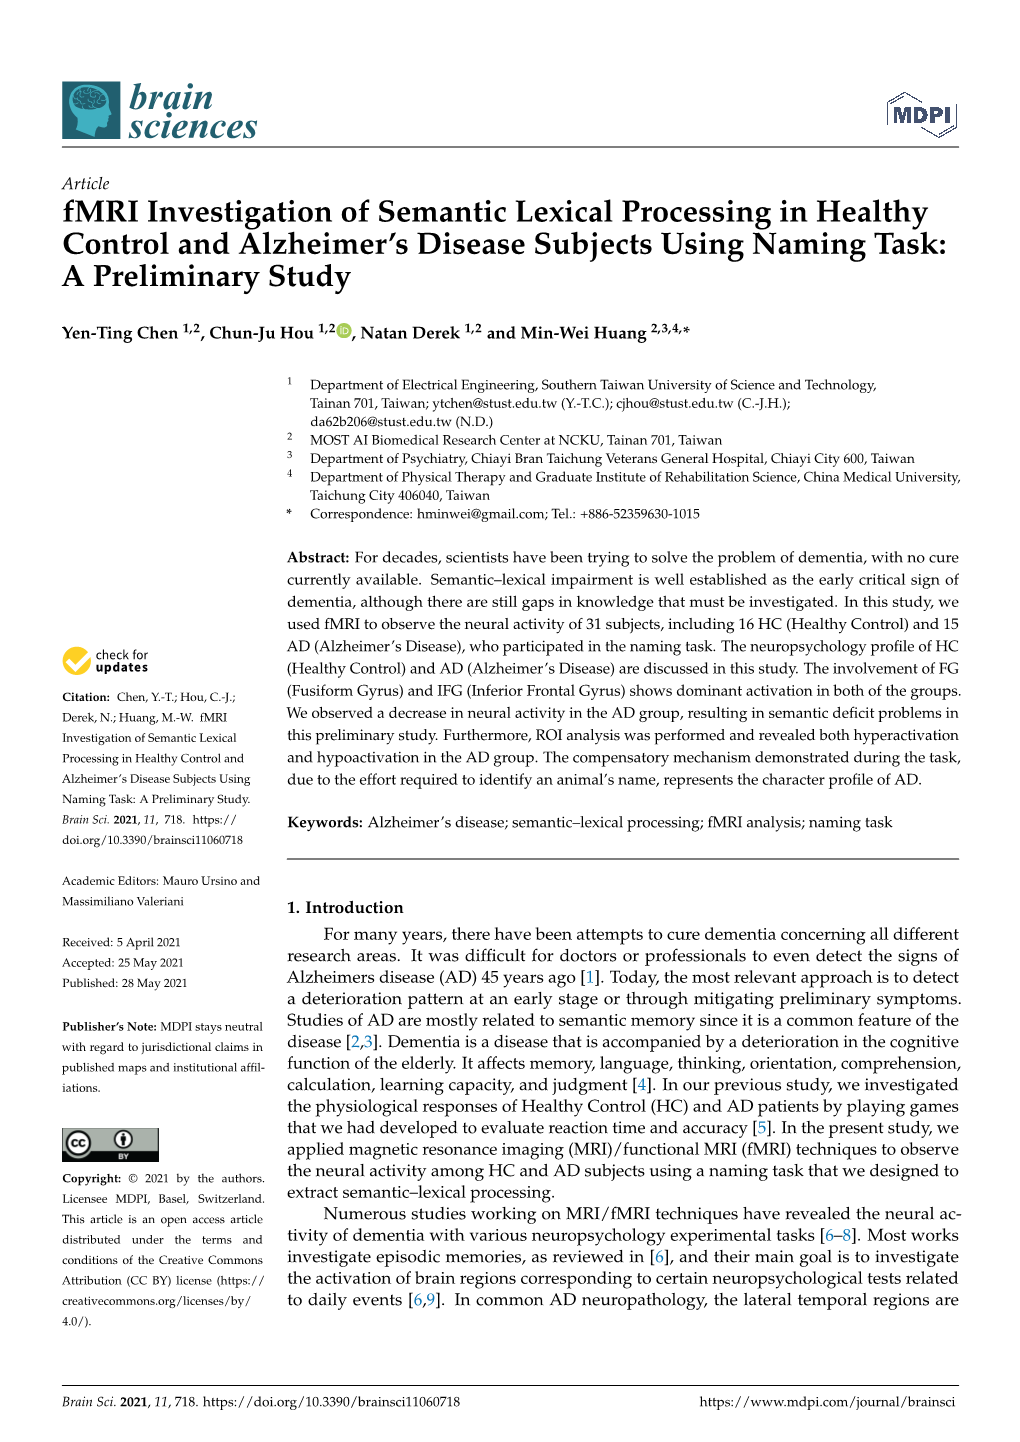 Fmri Investigation of Semantic Lexical Processing in Healthy Control and Alzheimer’S Disease Subjects Using Naming Task: a Preliminary Study